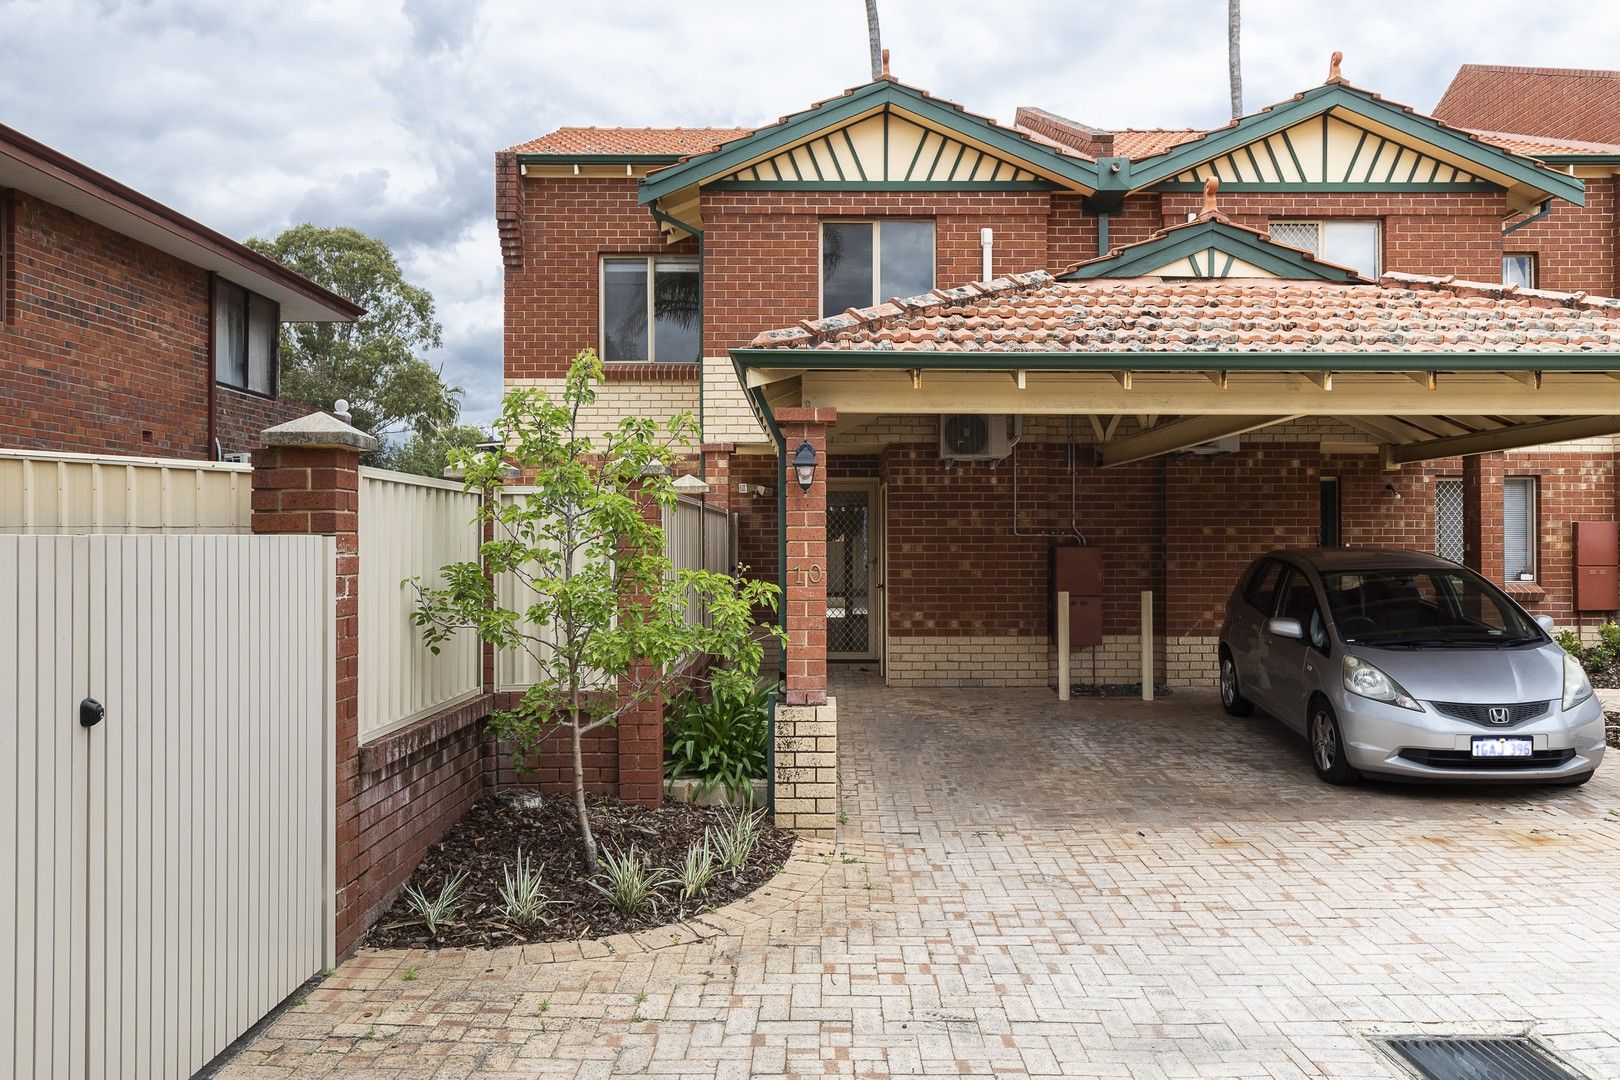 3 bedrooms Townhouse in 10/64 First Avenue MOUNT LAWLEY WA, 6050